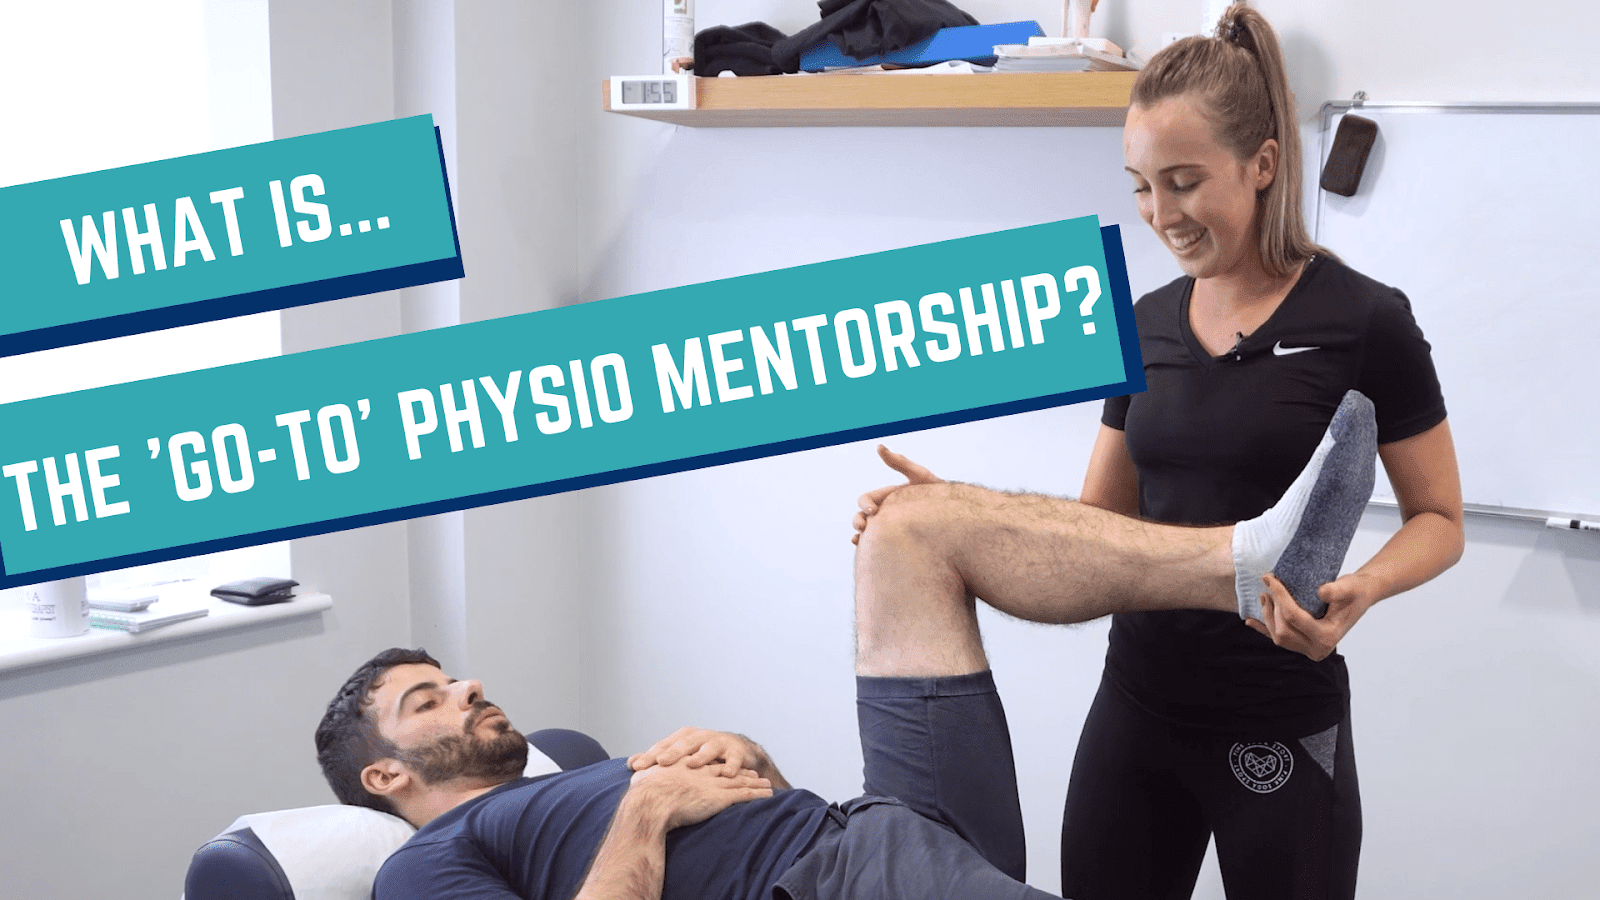 What is the 'Go-To' Physio Mentorship?